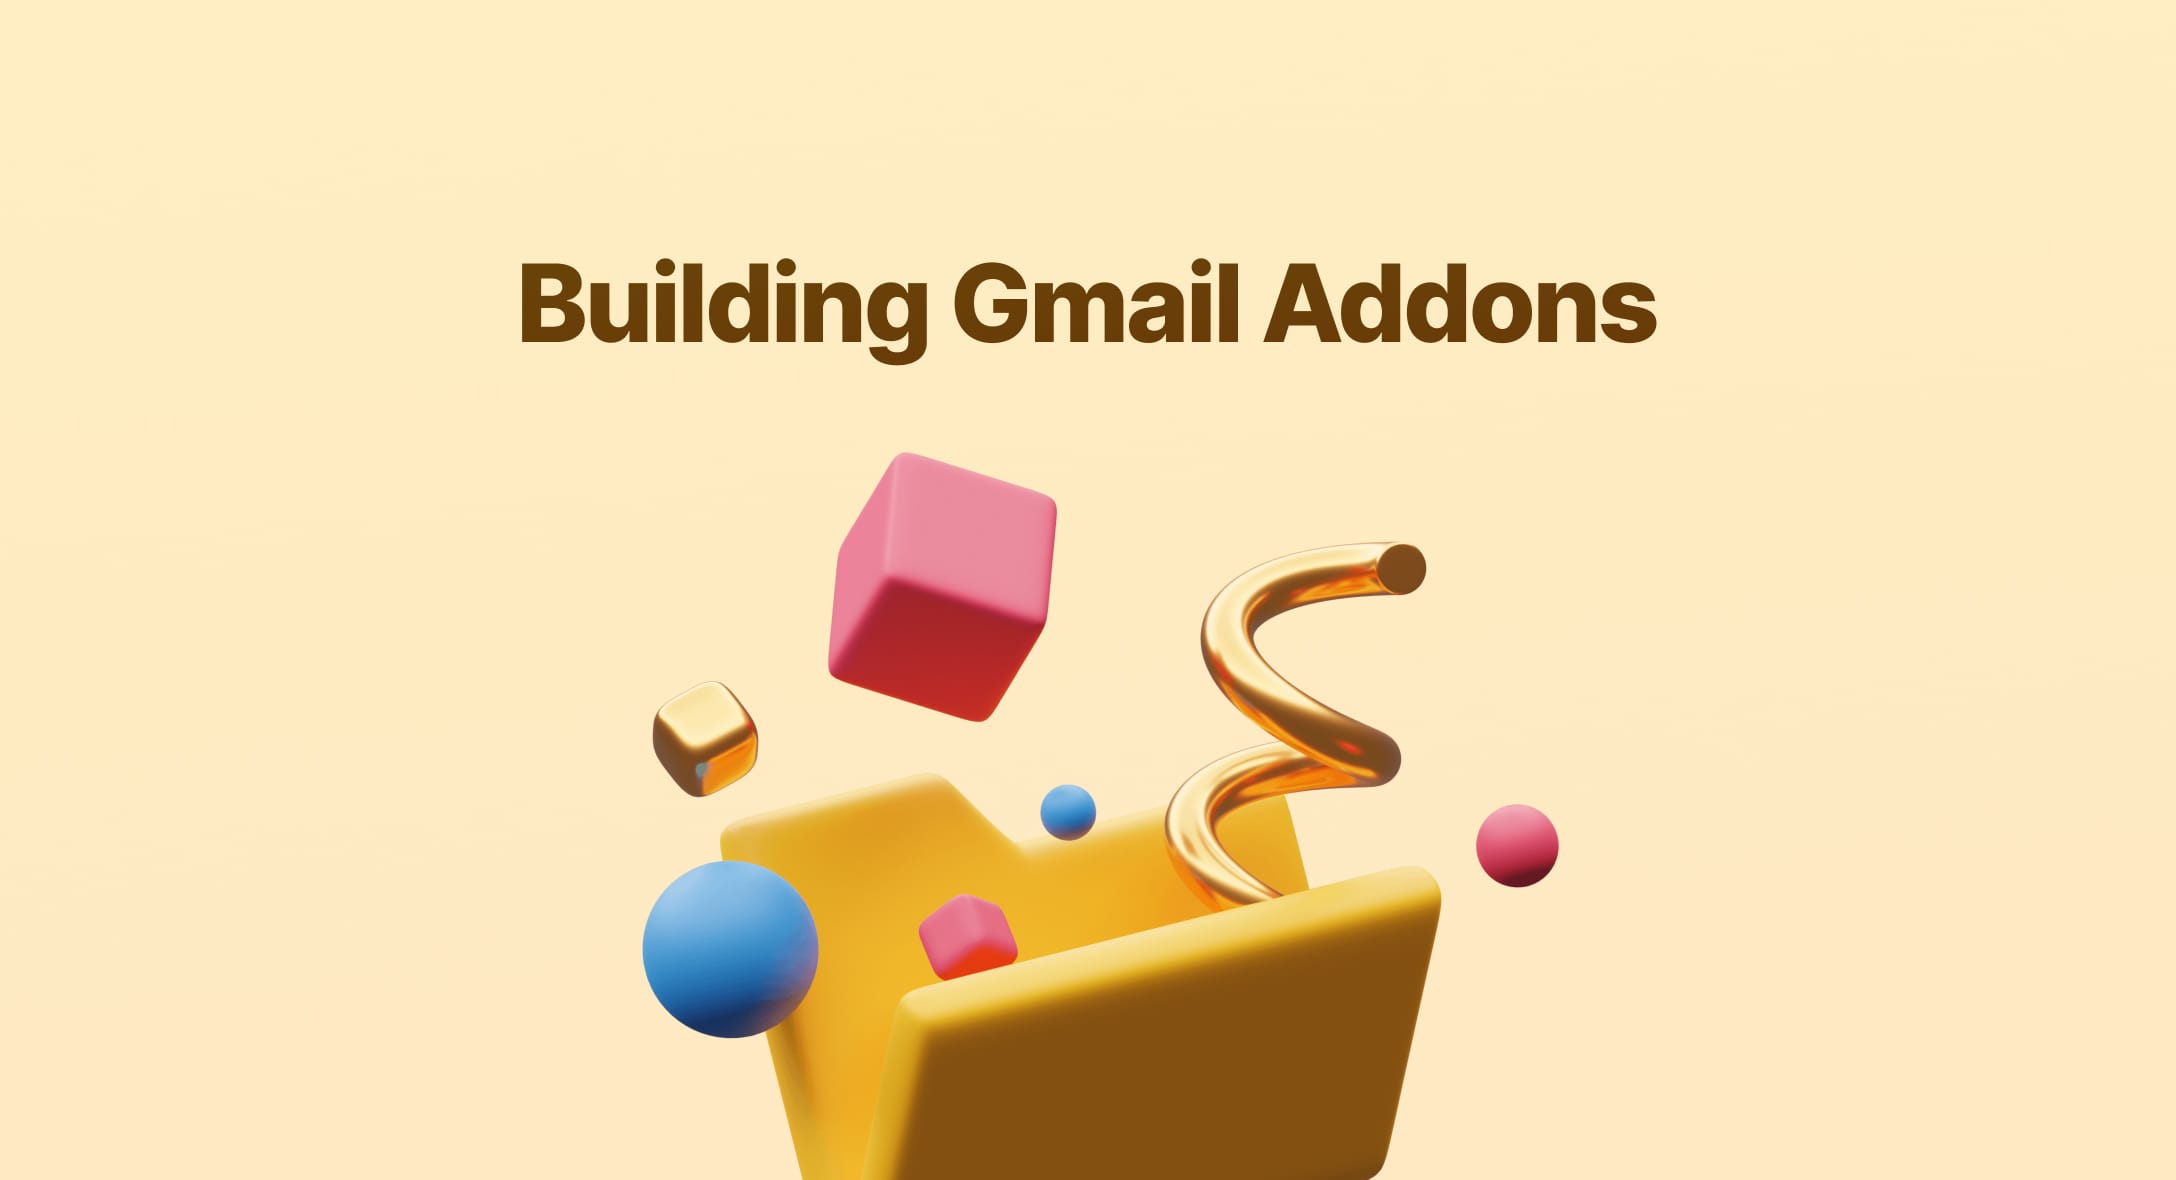 Building Gmail Addons